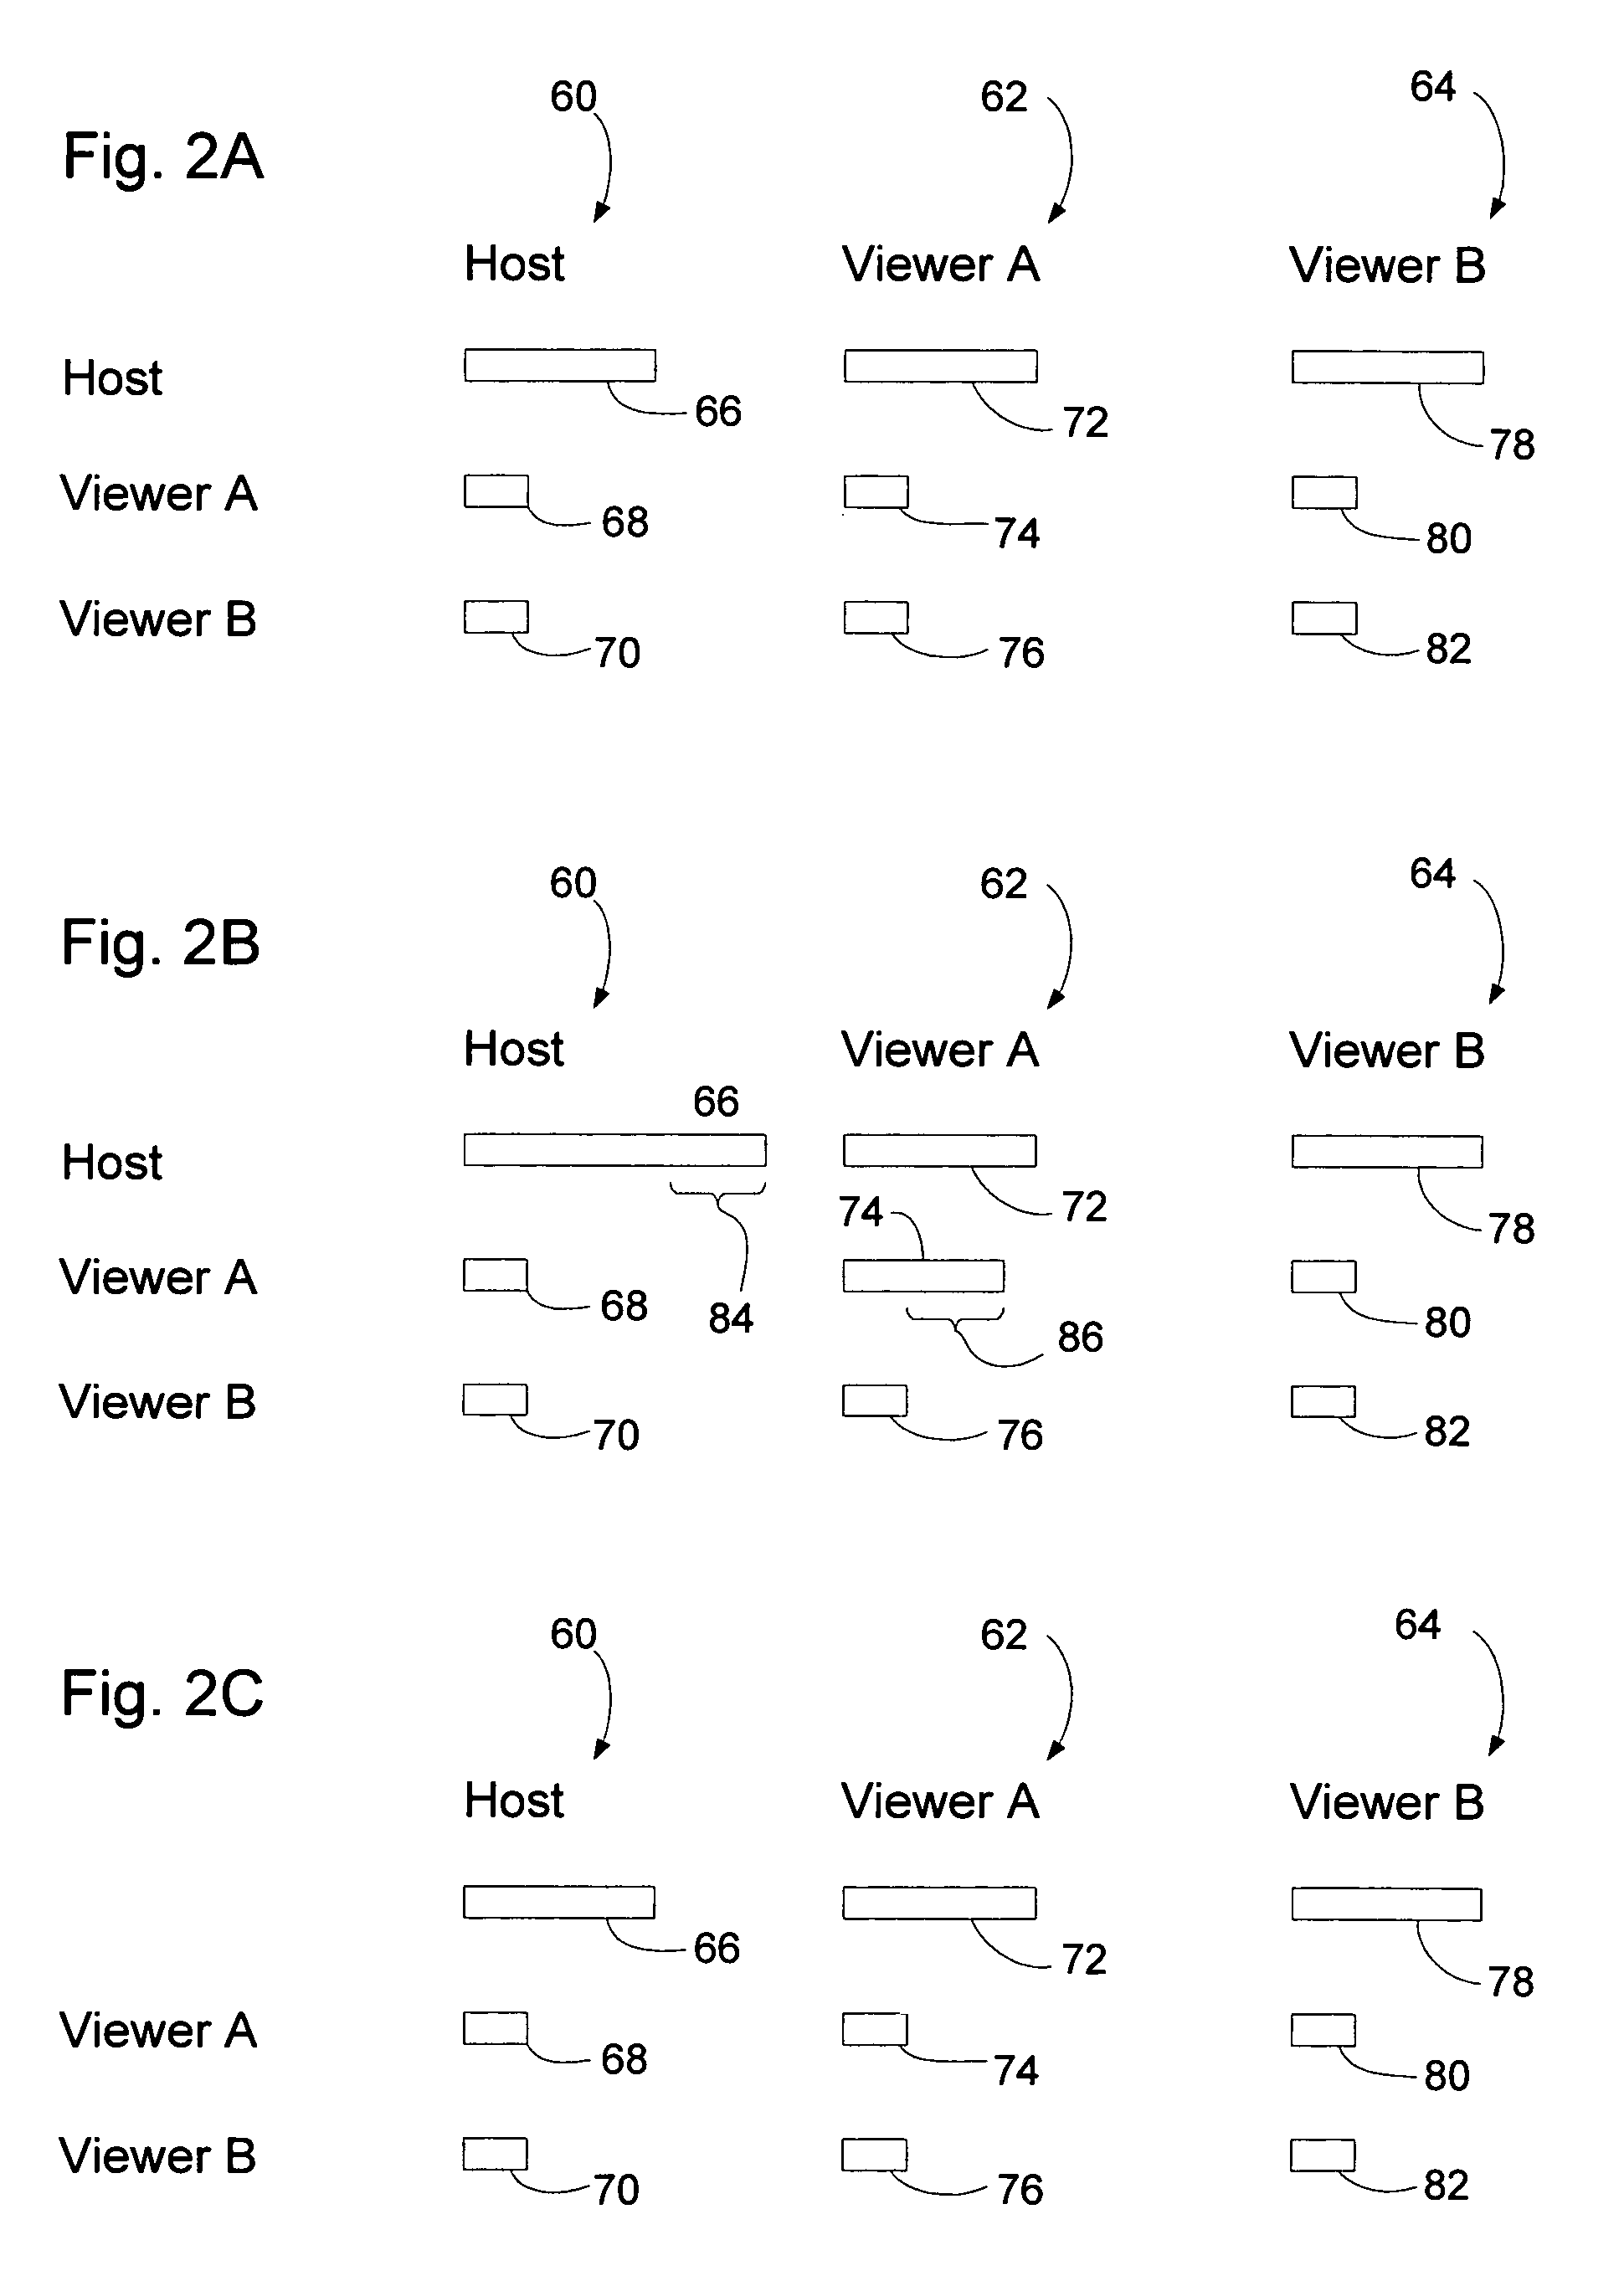 Scalable multiparty conferencing and collaboration system and method of dynamically allocating system resources in same